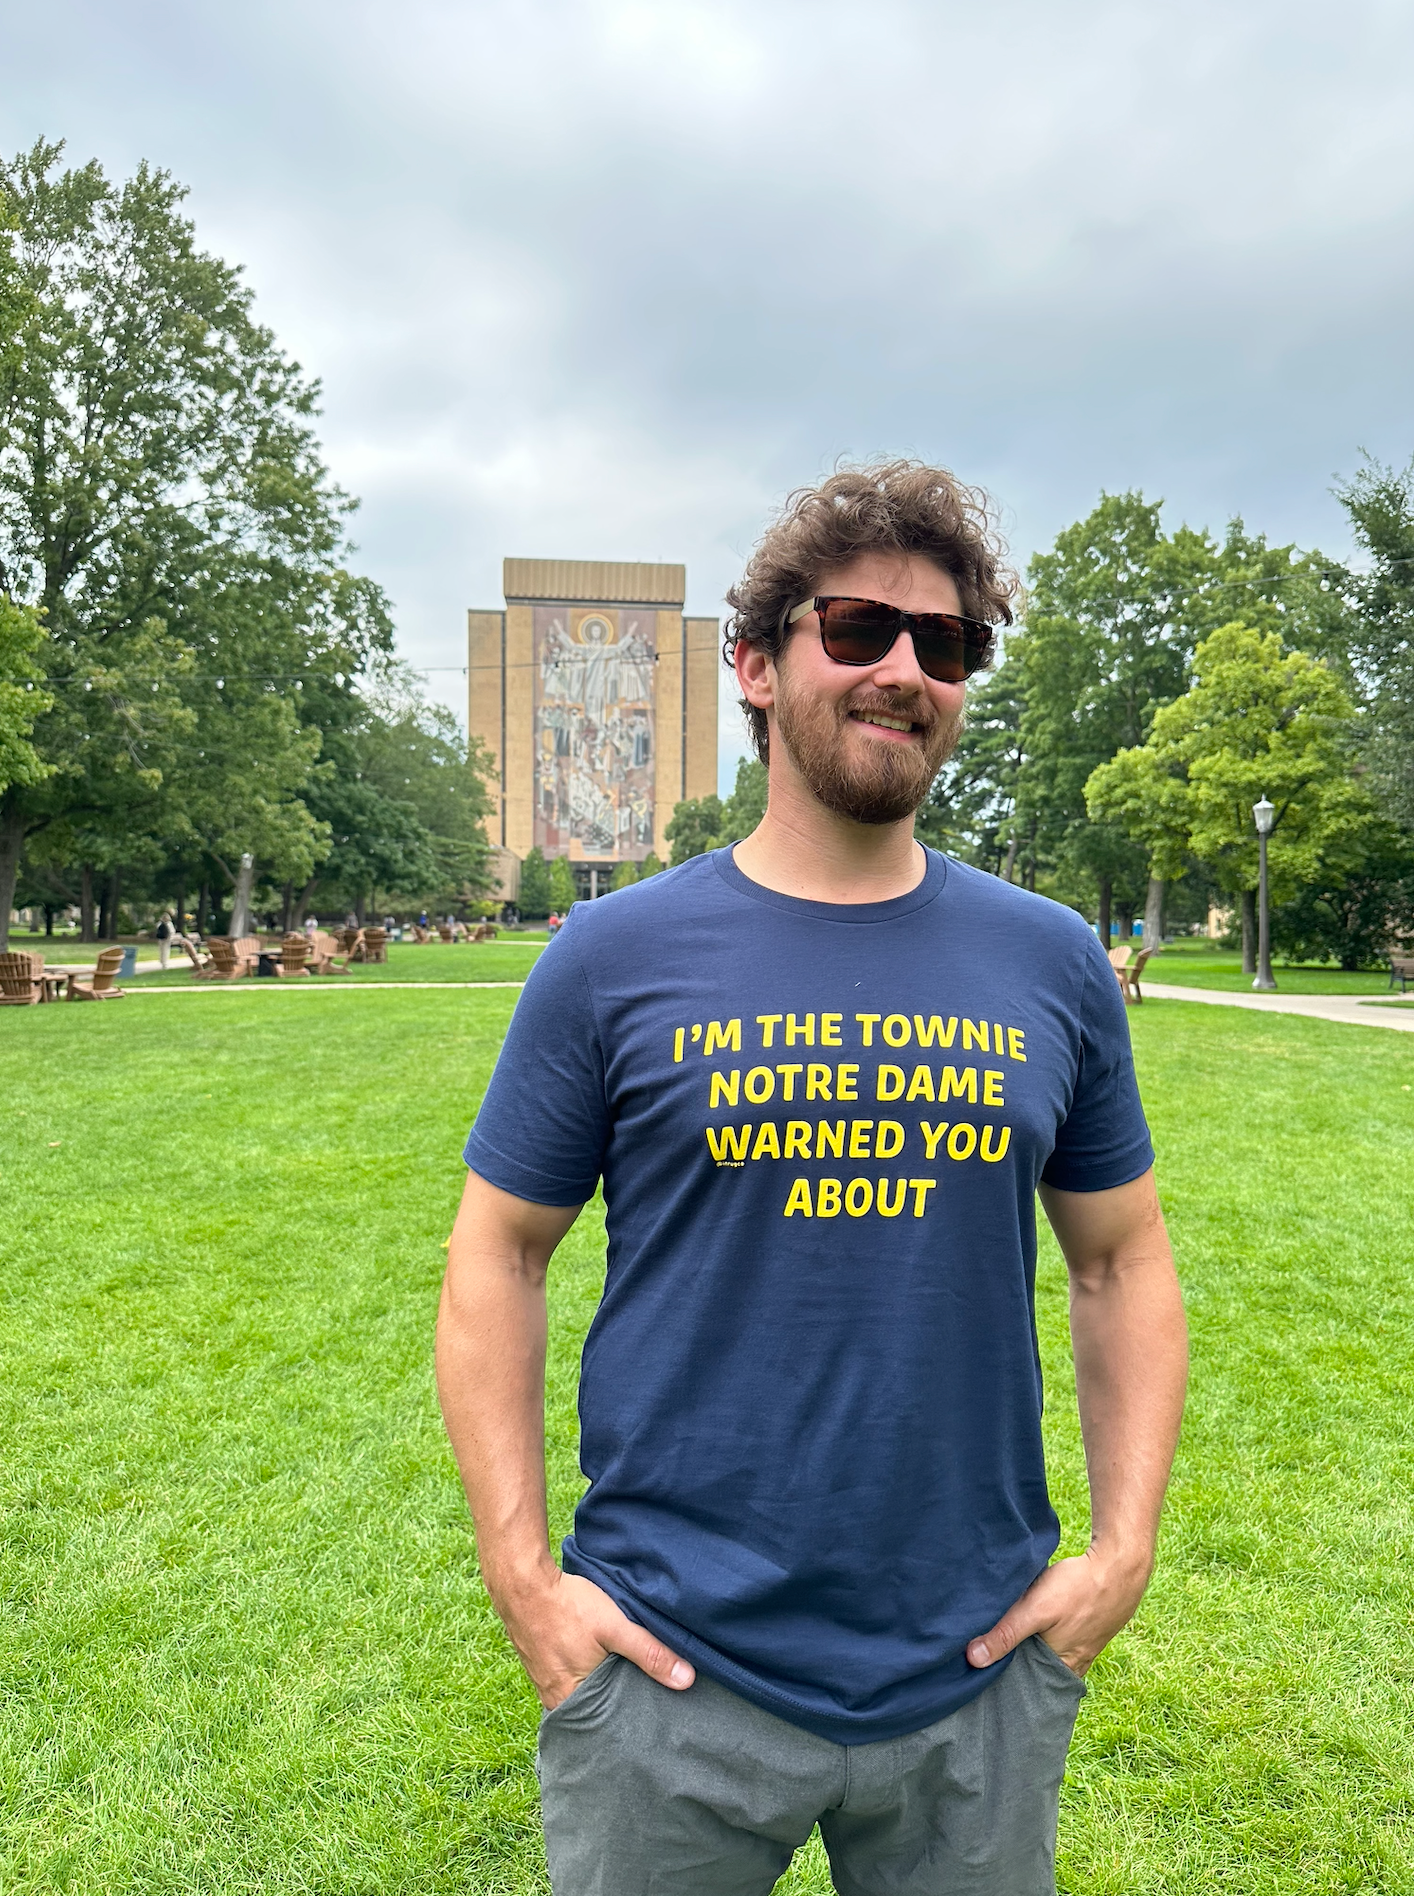 I'm the townie Notre dame warned you about shirt